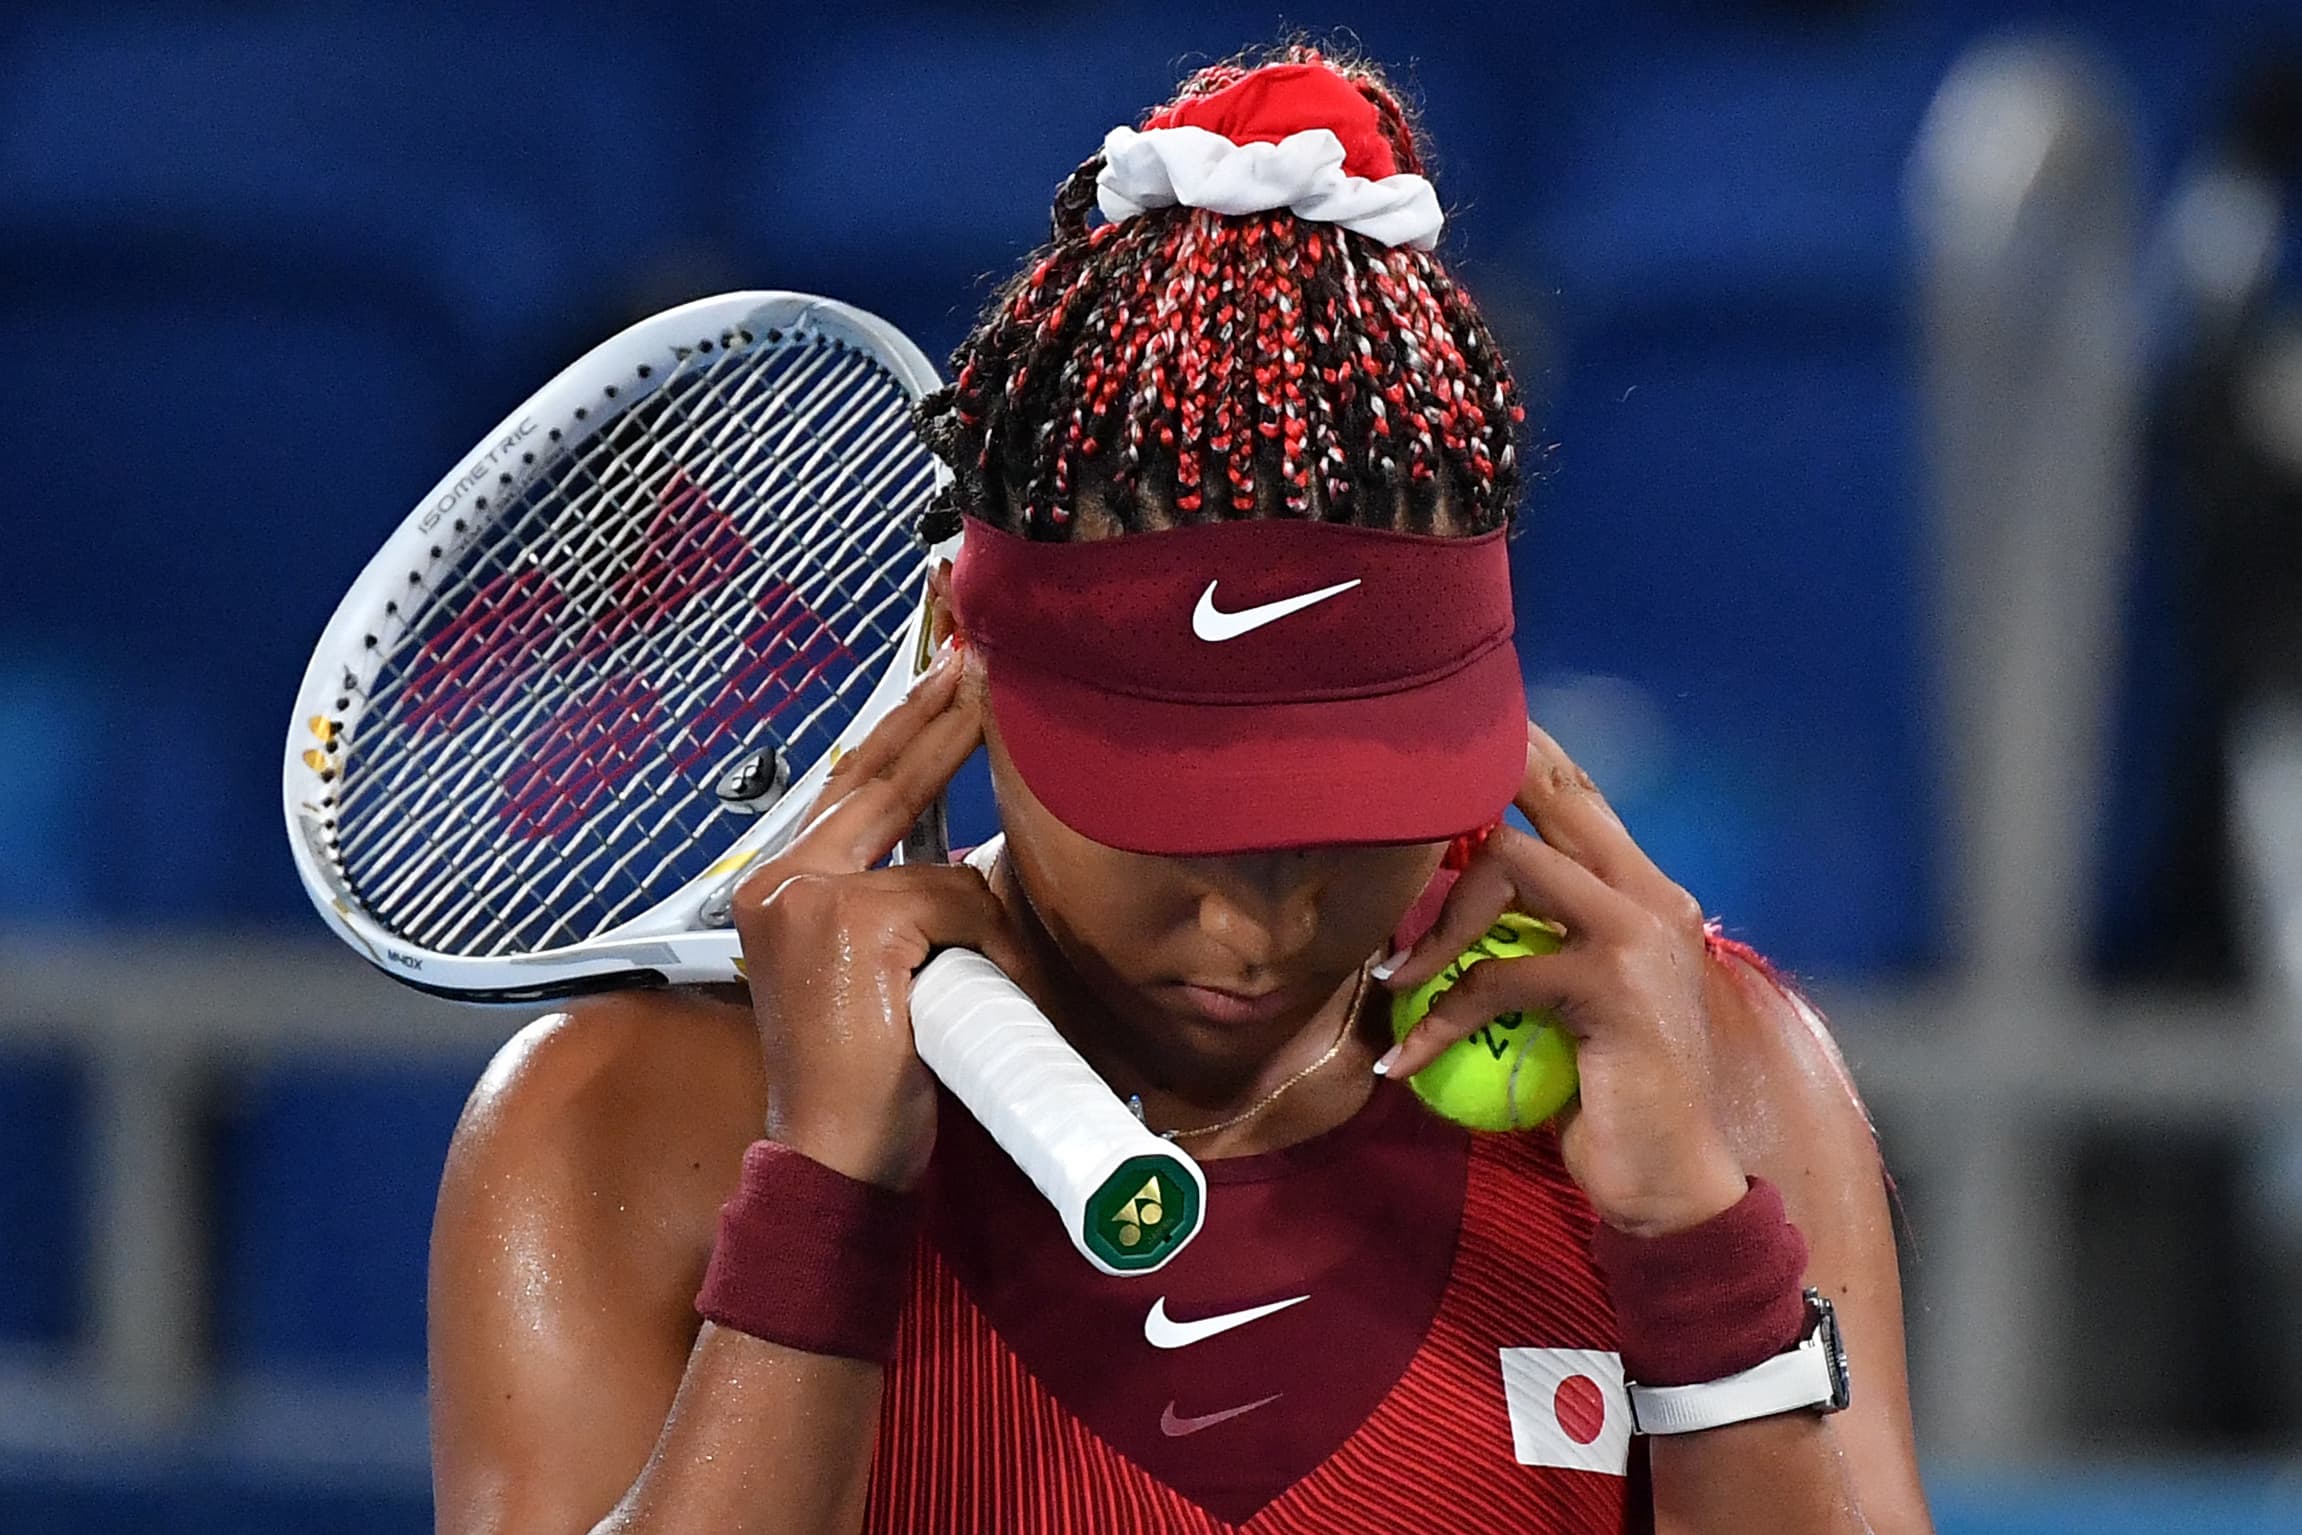 Naomi Osaka plans to take indefinite break from tennis after shock U.S. Open exit